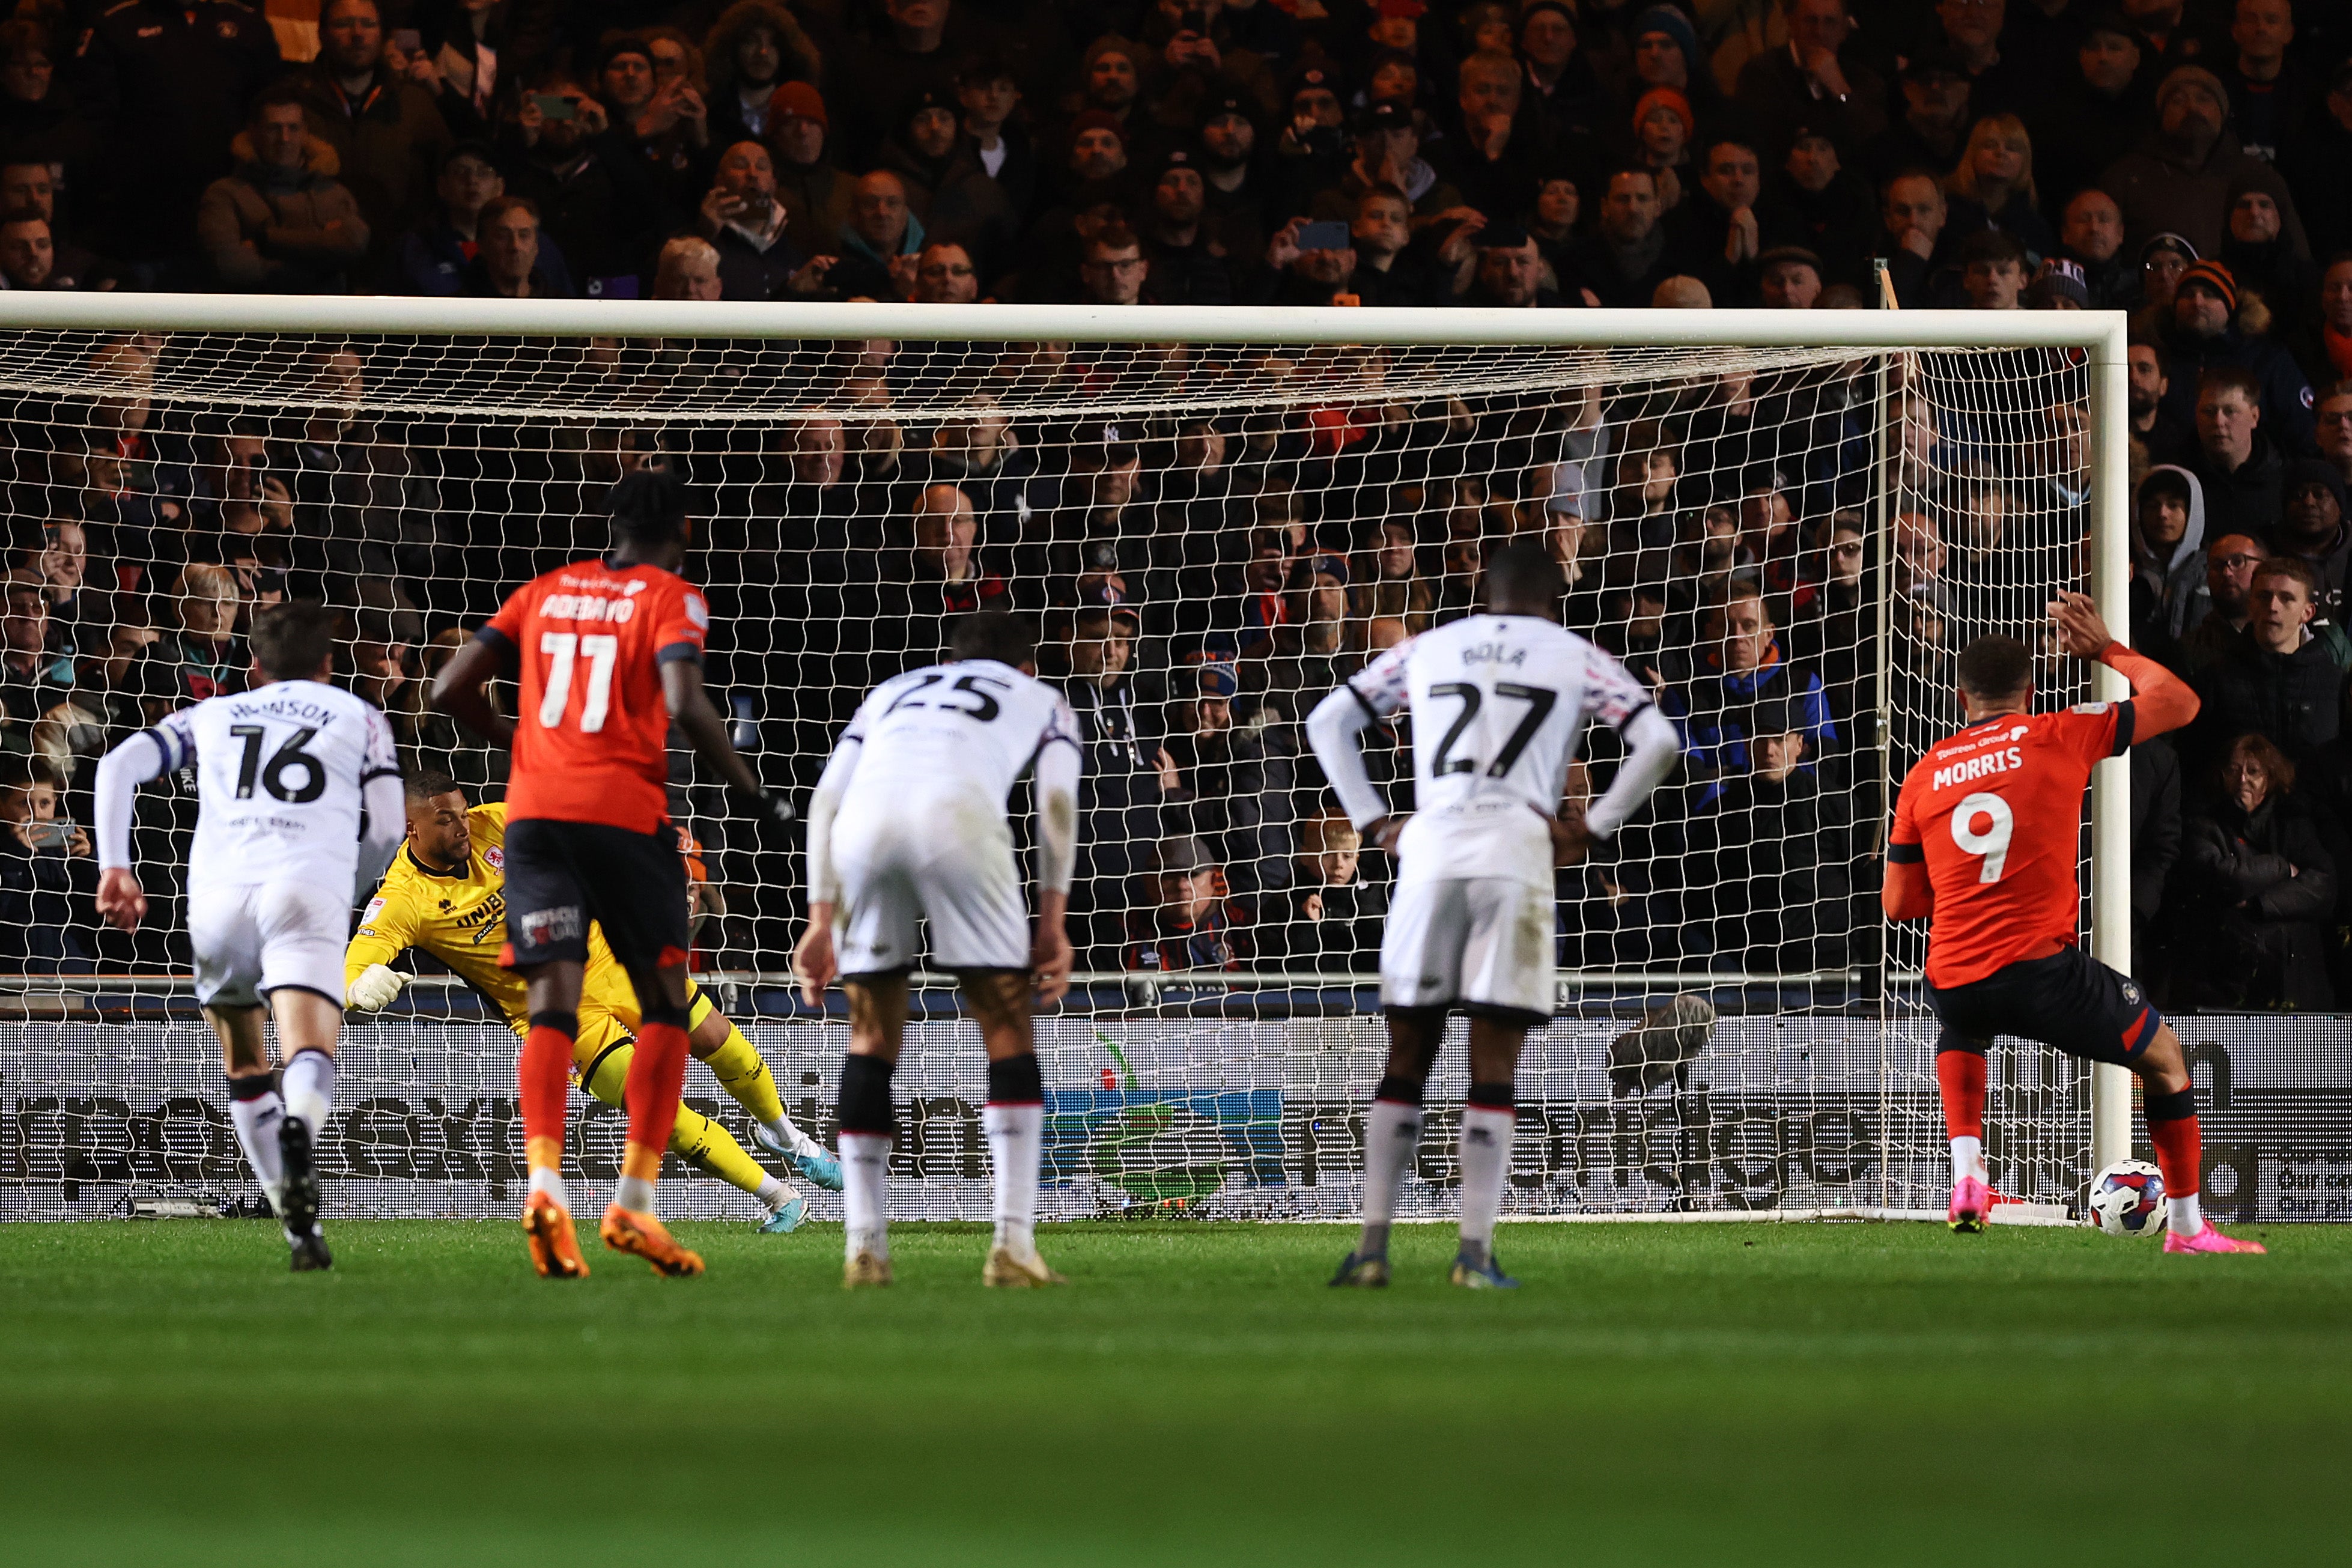 Zack Steffen fails to save as Carlton Morris scores the team’s second goal from a penalty